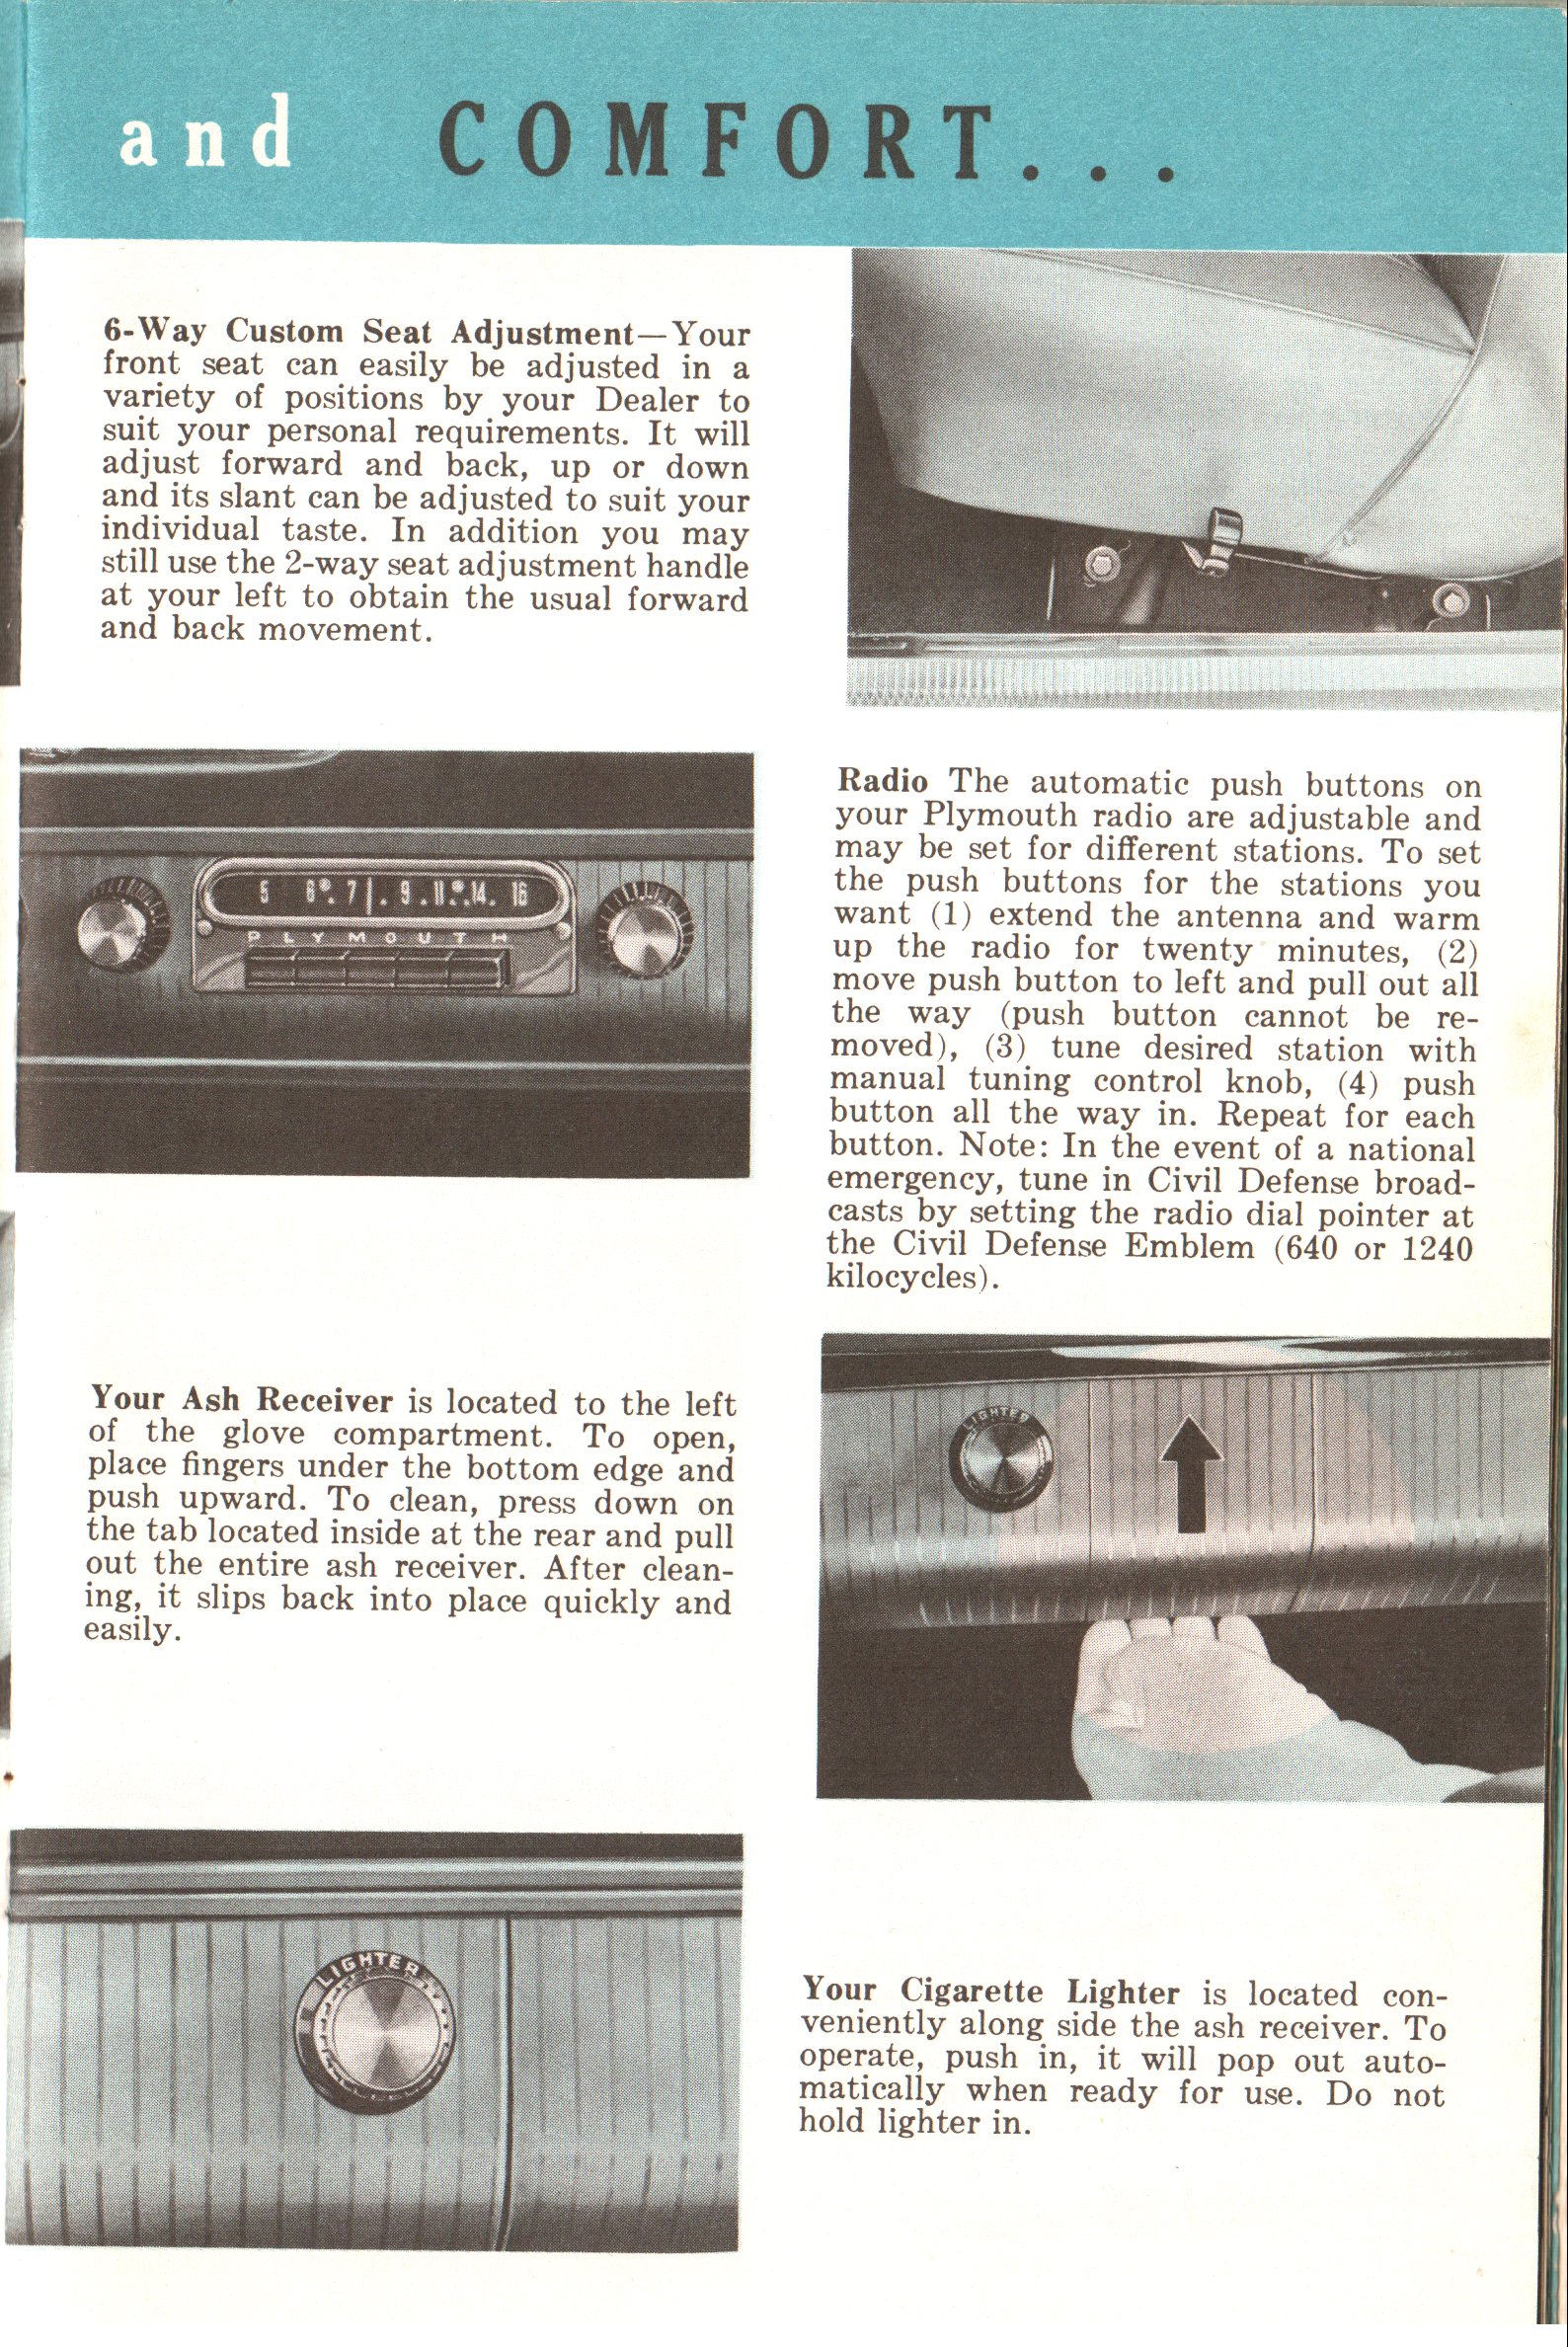 1960_Plymouth_Owners_Manual-13